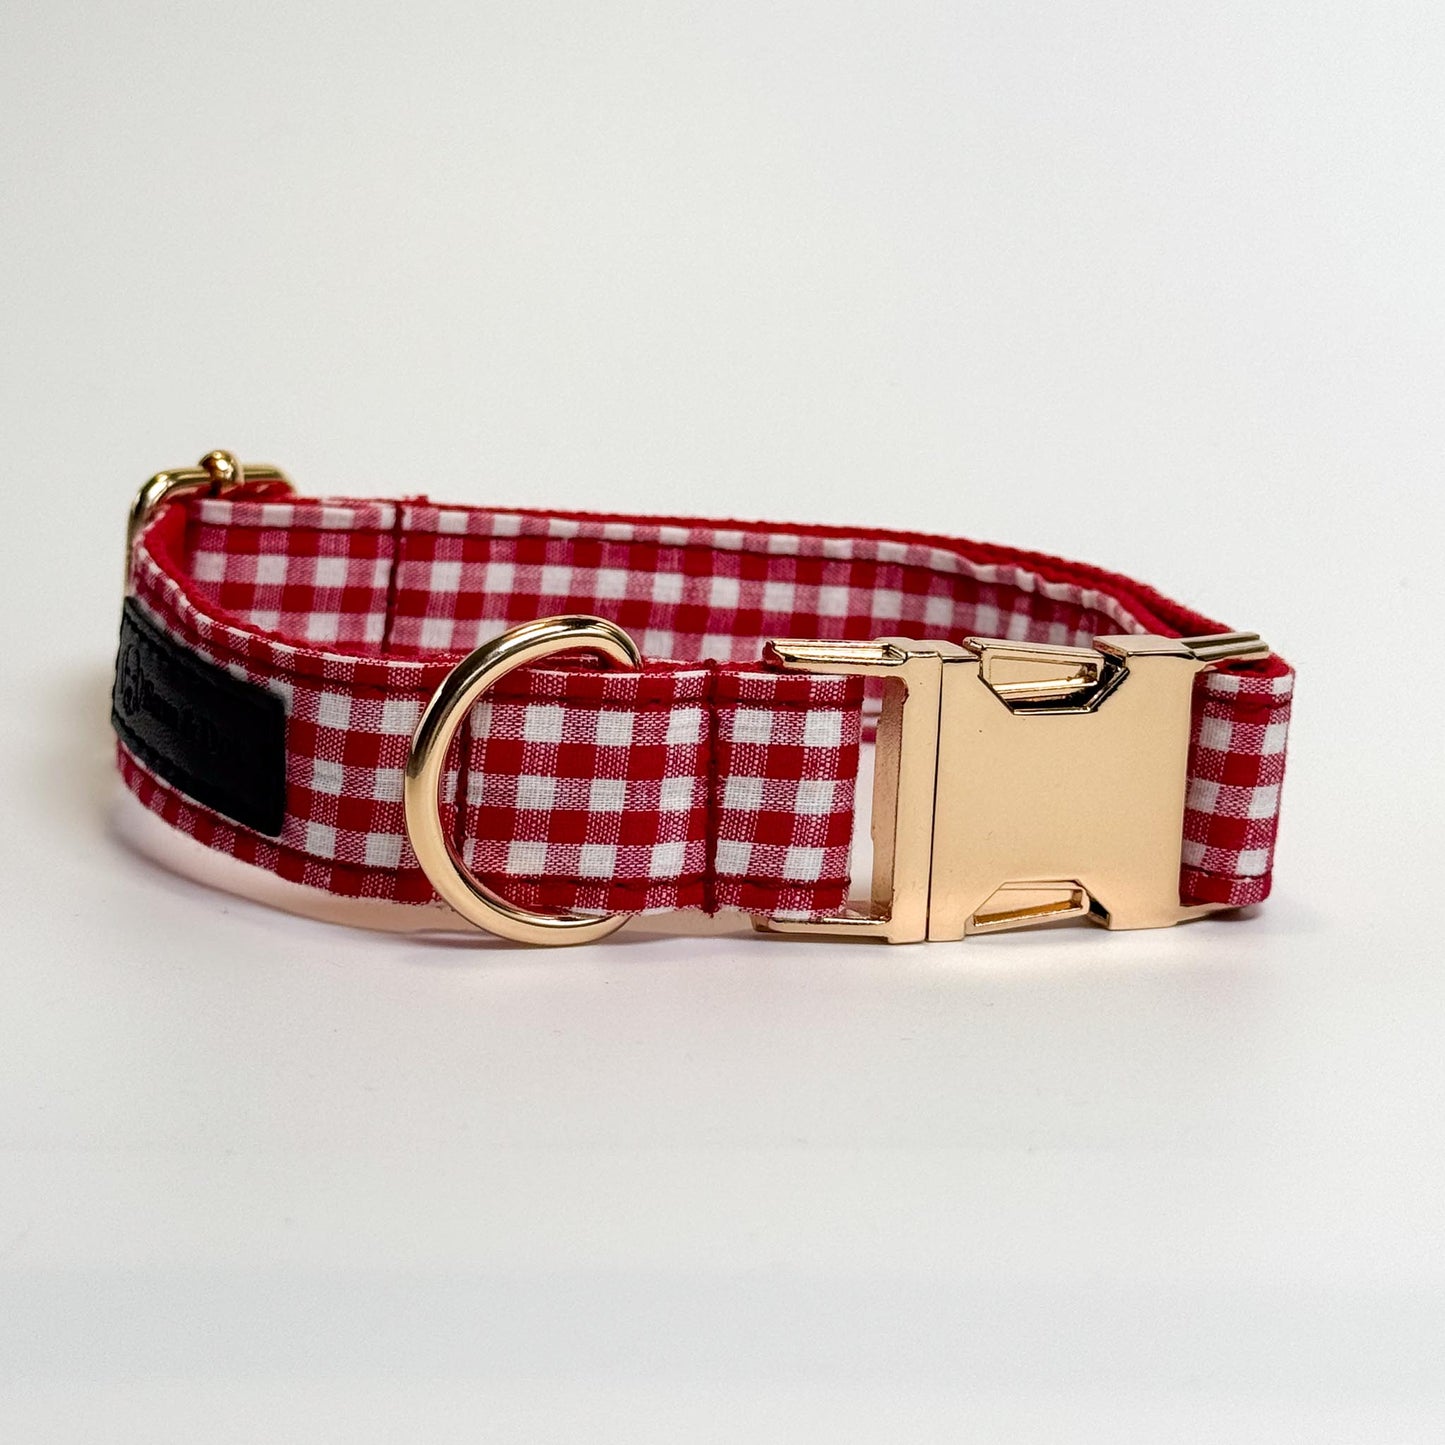 Picnic in the Park Engraved Dog Collar - Sam and Dot